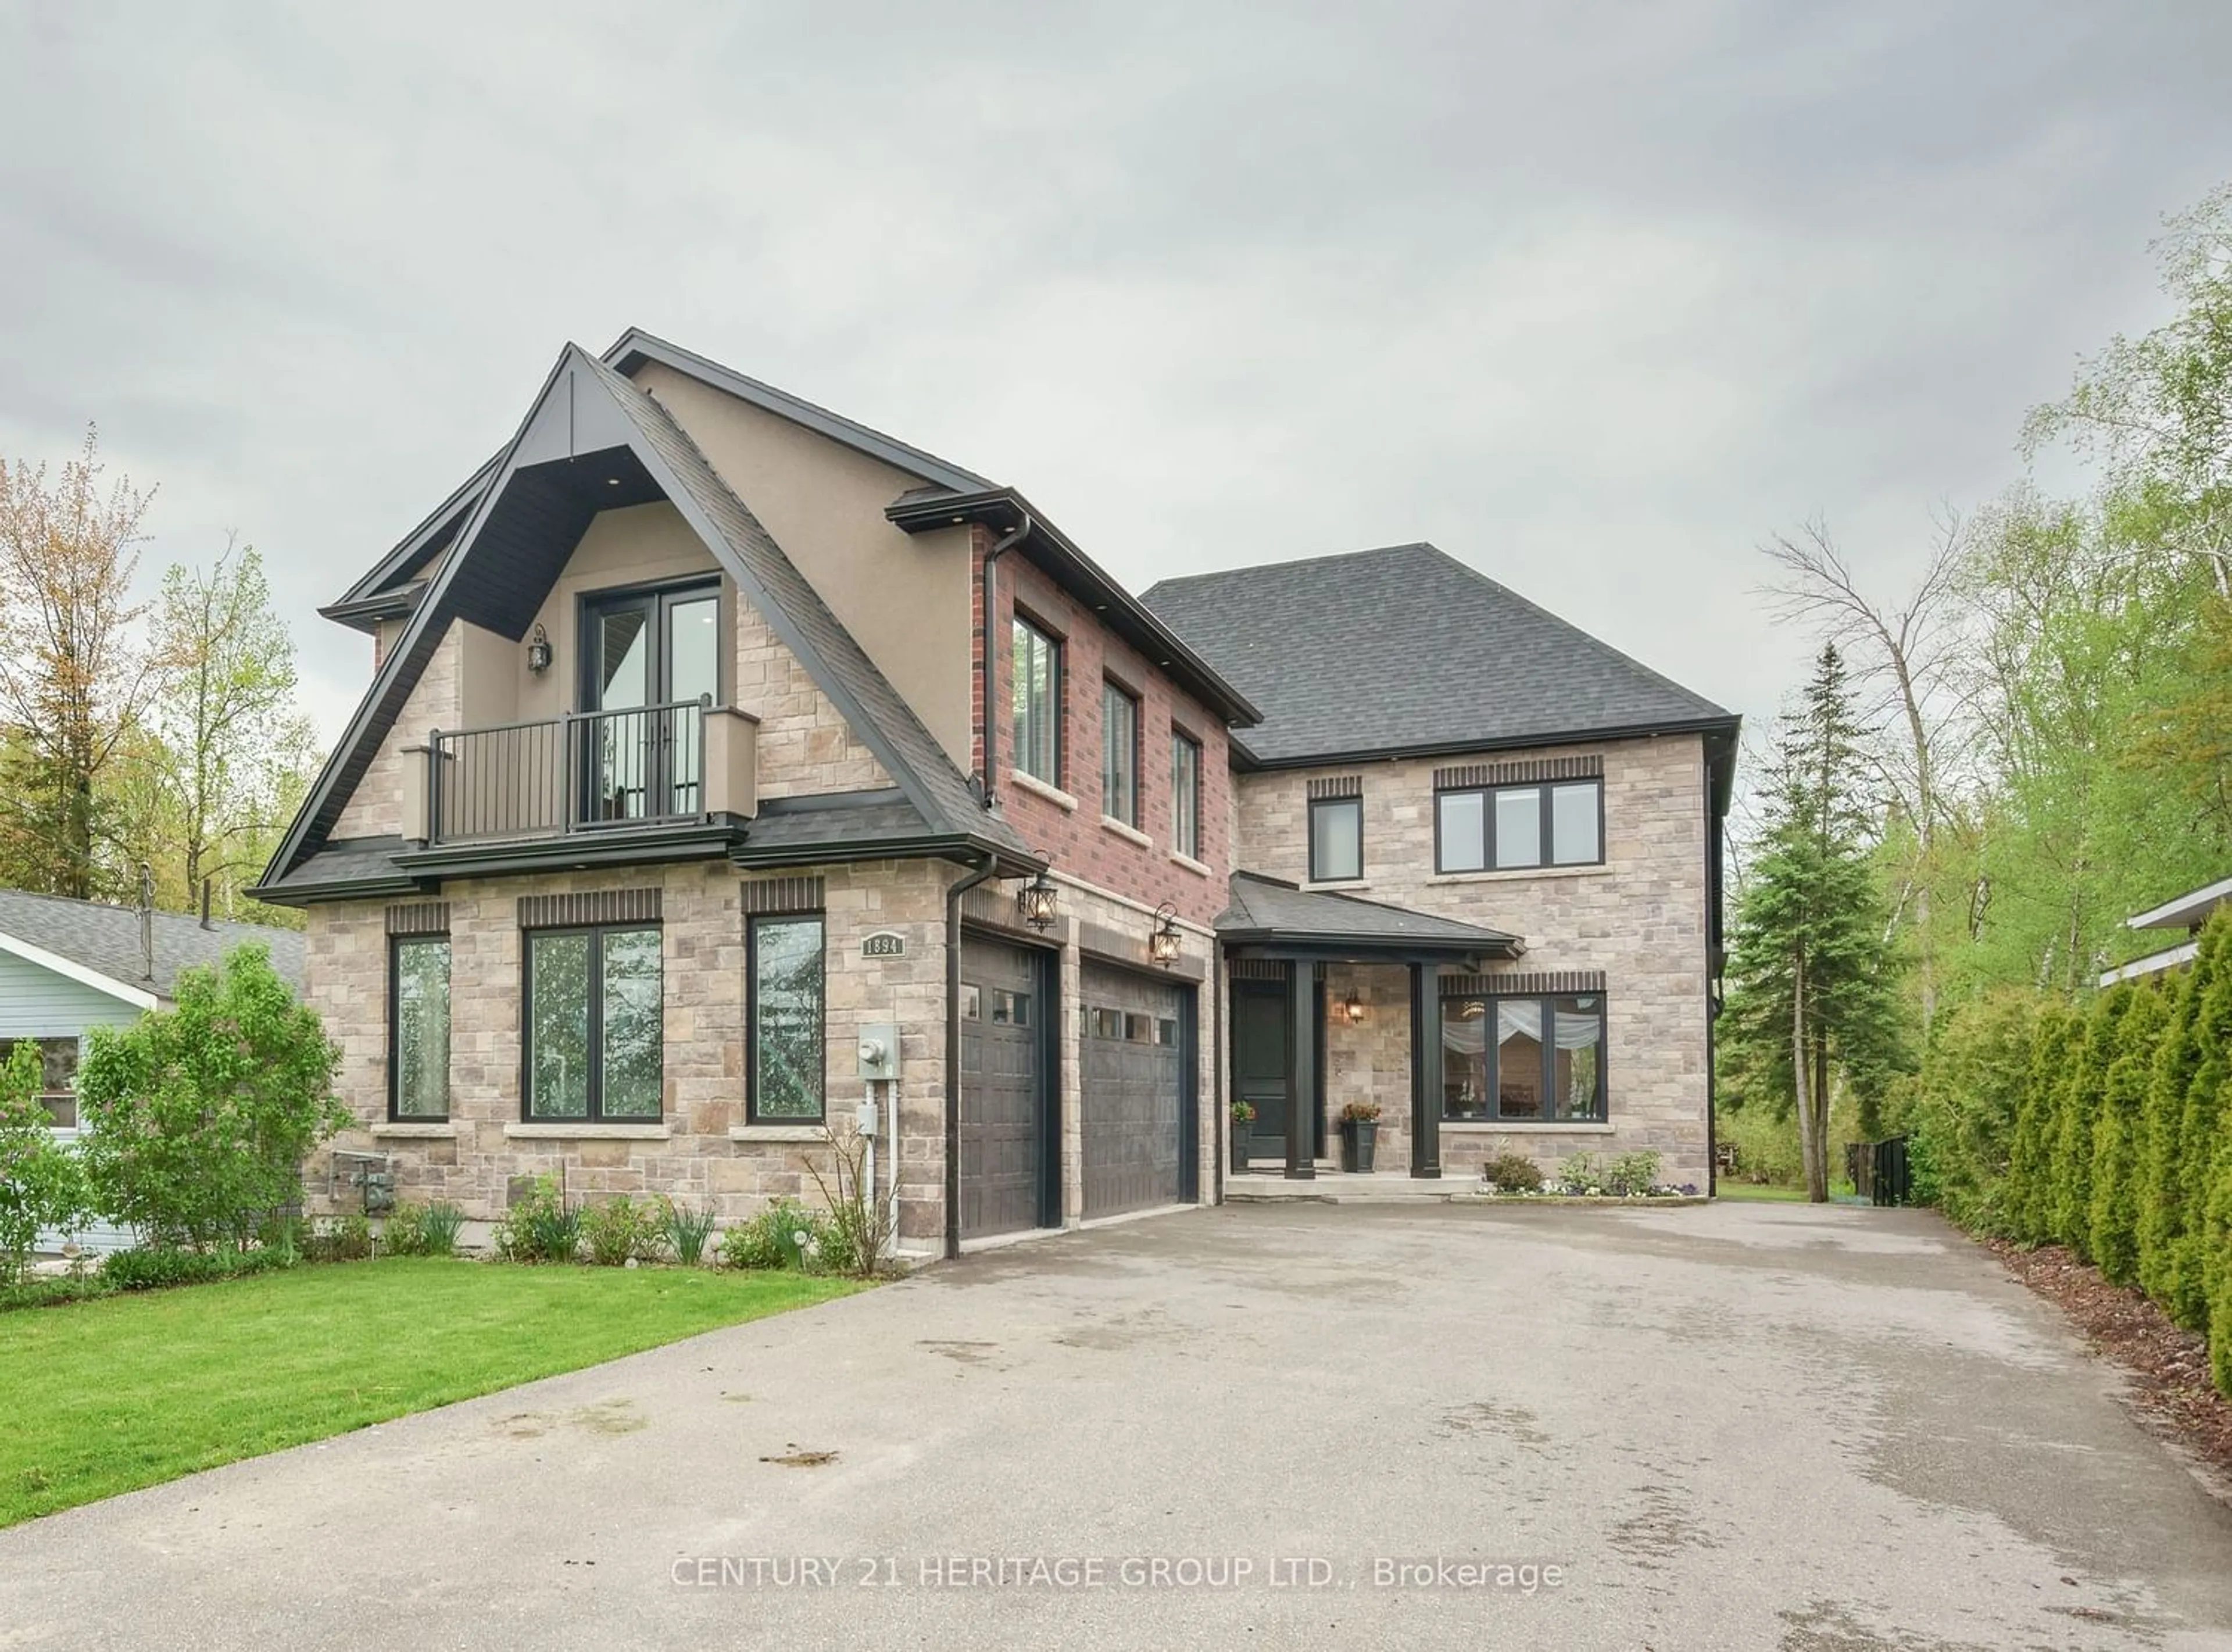 Home with brick exterior material for 1894 Simcoe Blvd, Innisfil Ontario L9S 4N4